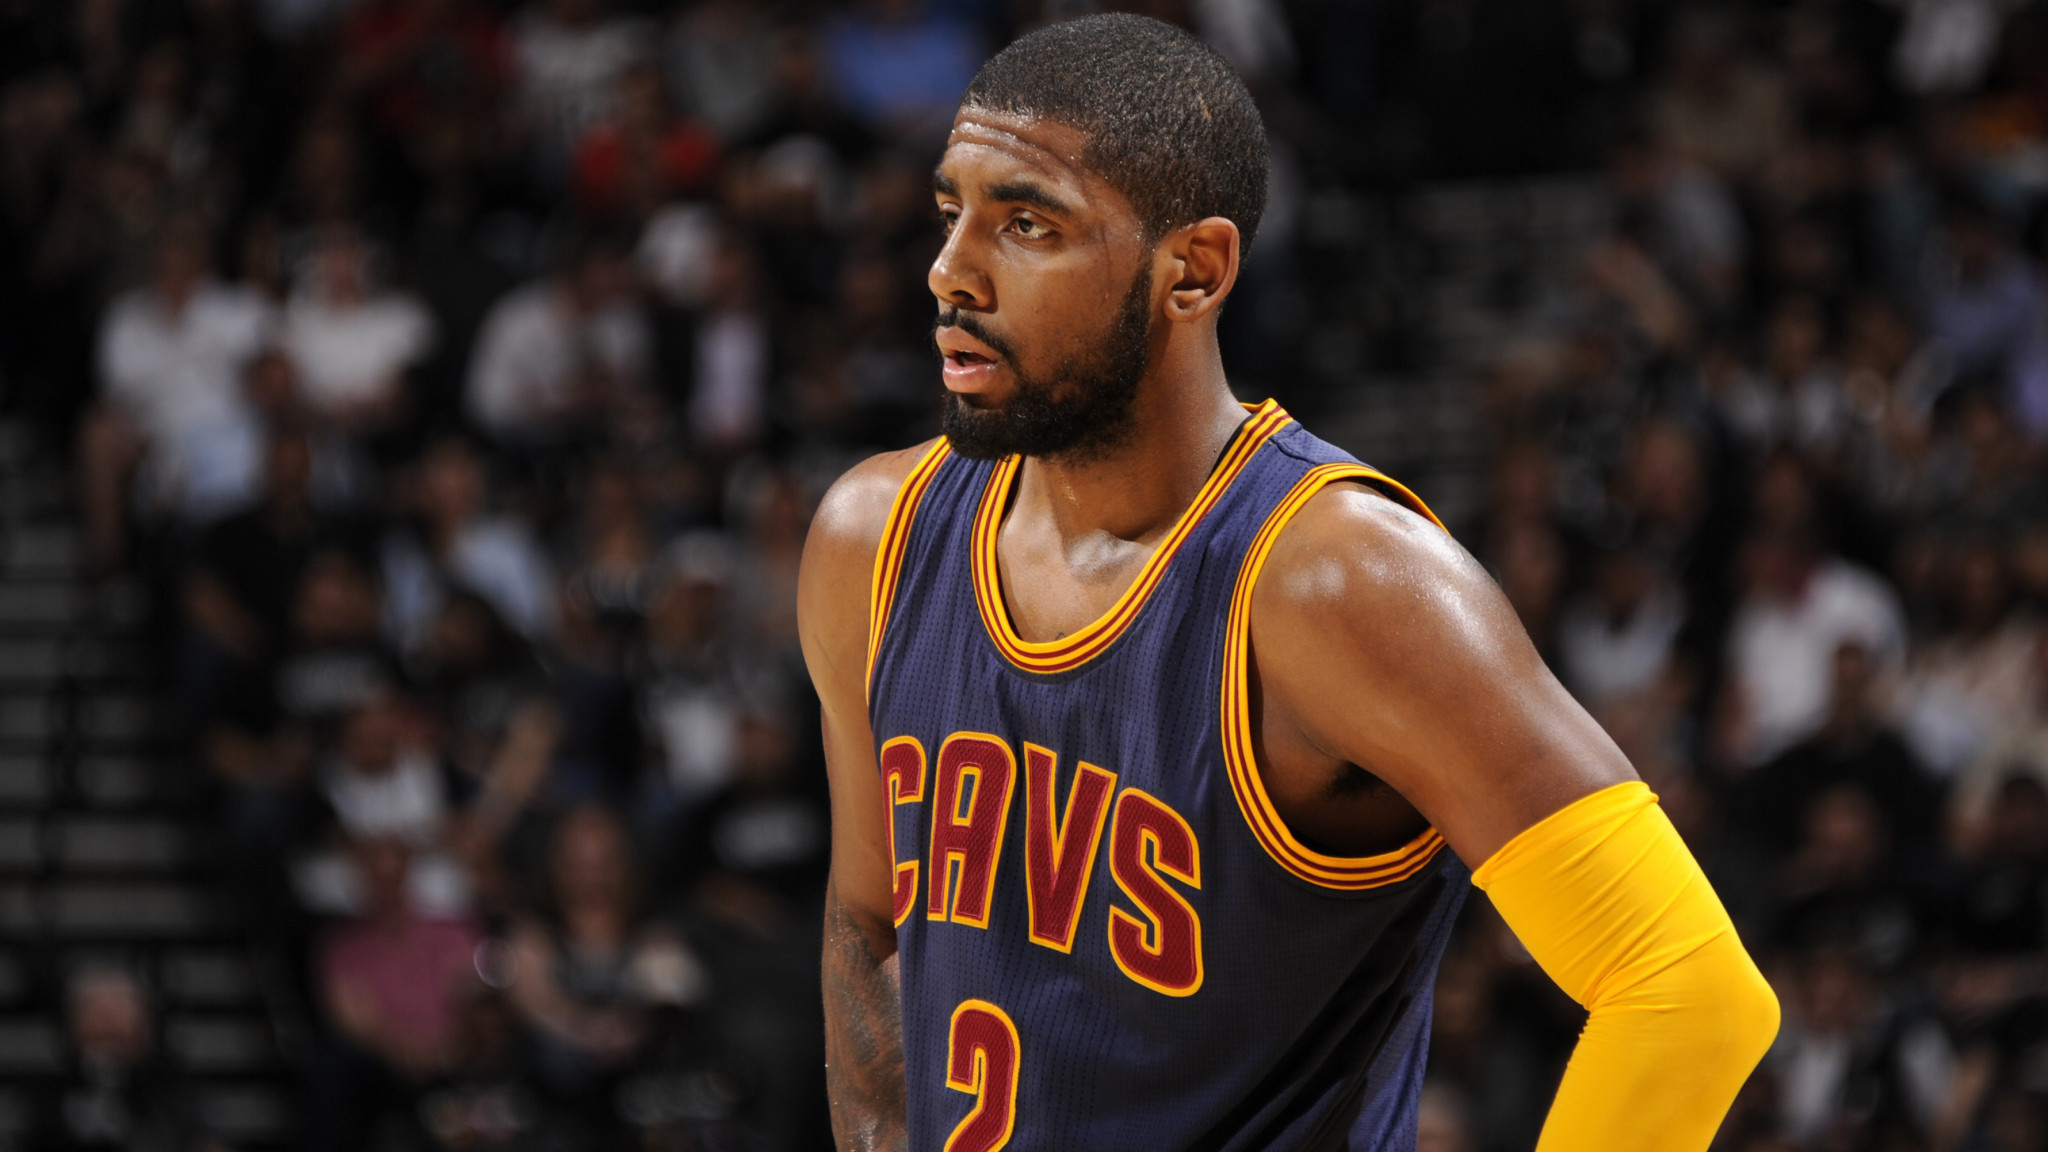 Kyrie Irving, Sports wallpapers, Sports HQ, 4K wallpapers, 2050x1160 HD Desktop